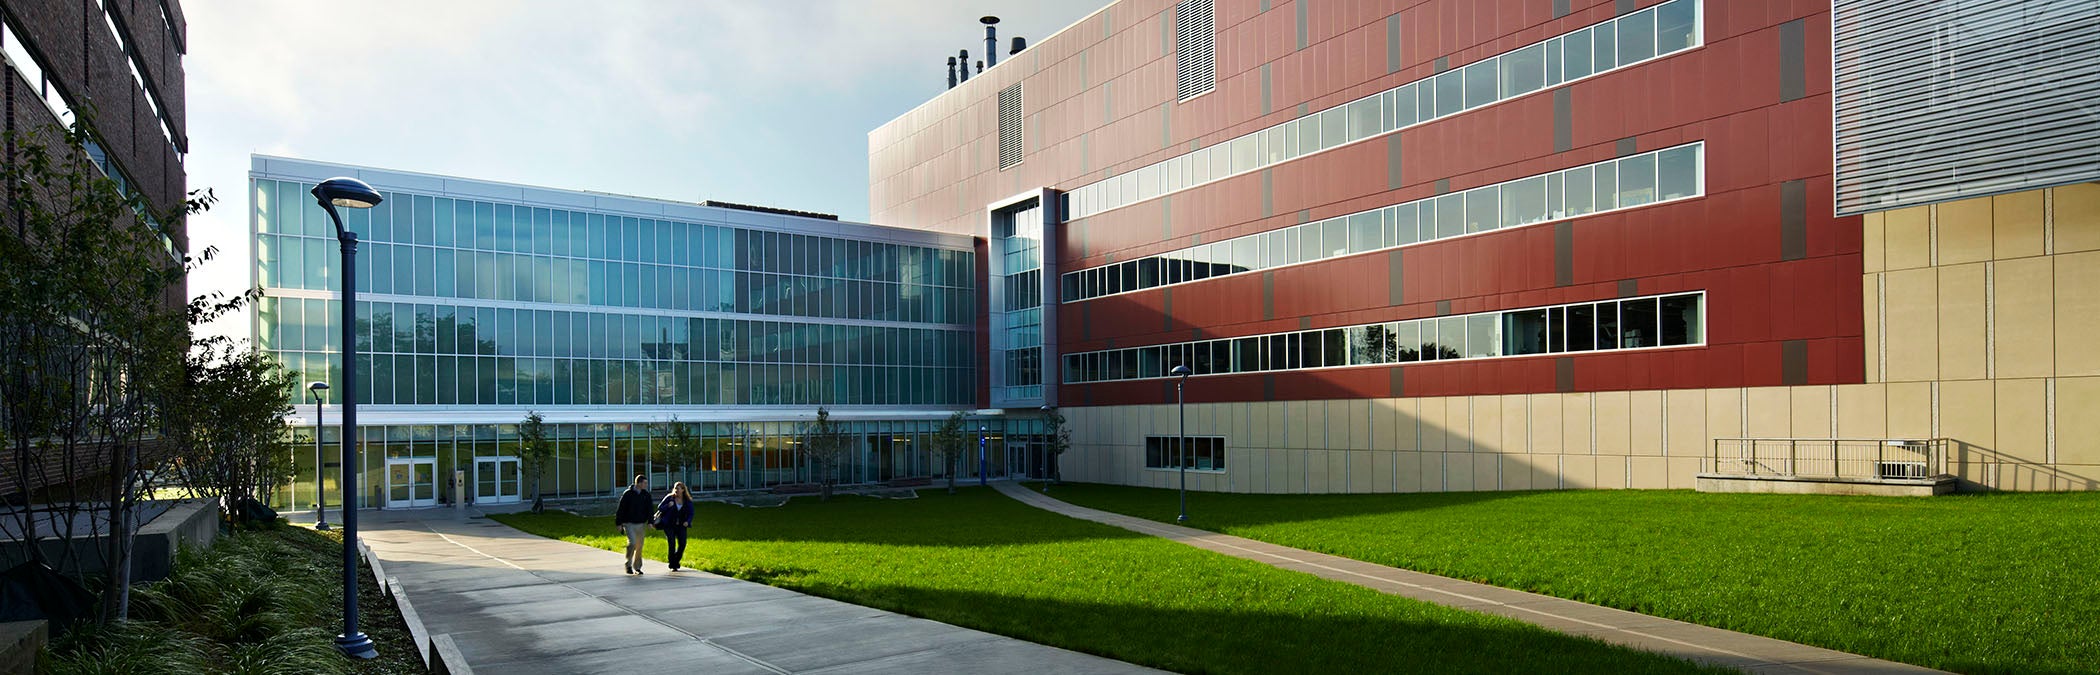 UMass Lowell Emerging Technologies and Innovation Center HDR